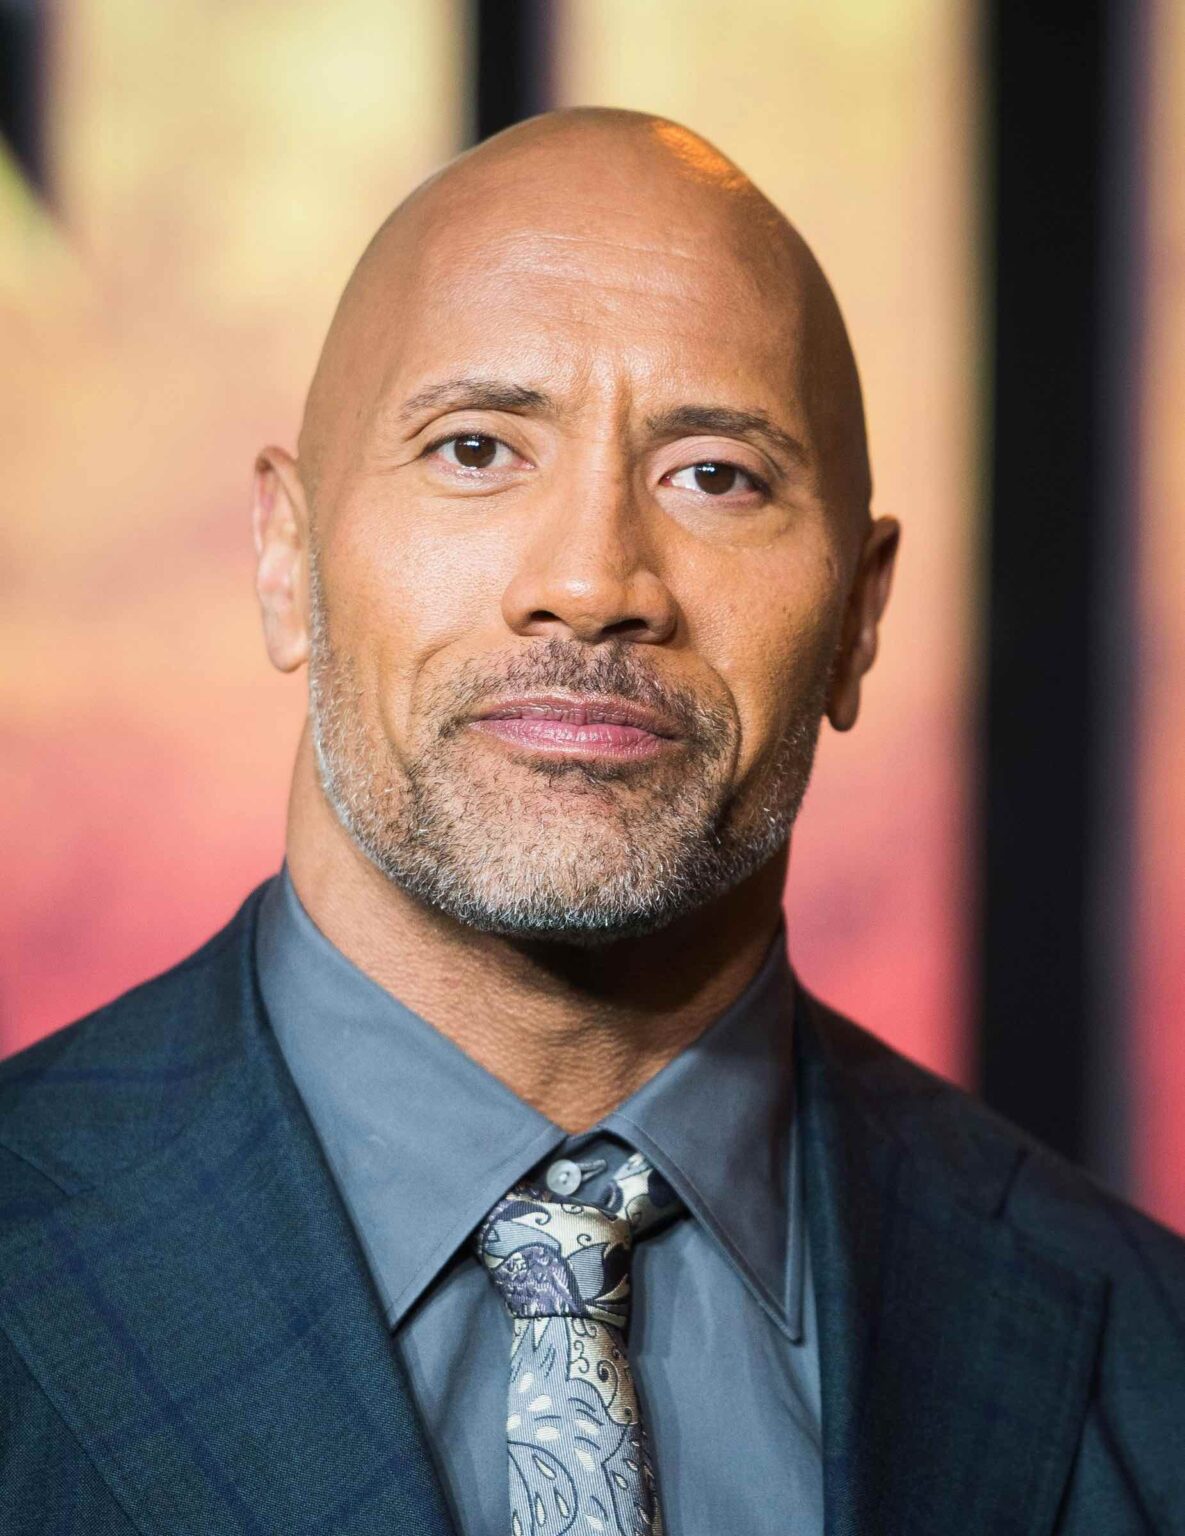 Dwayne “The Rock” Johnson has become one of the most popular (and highest paid) movie actors in Hollywood. Watch these movies now!